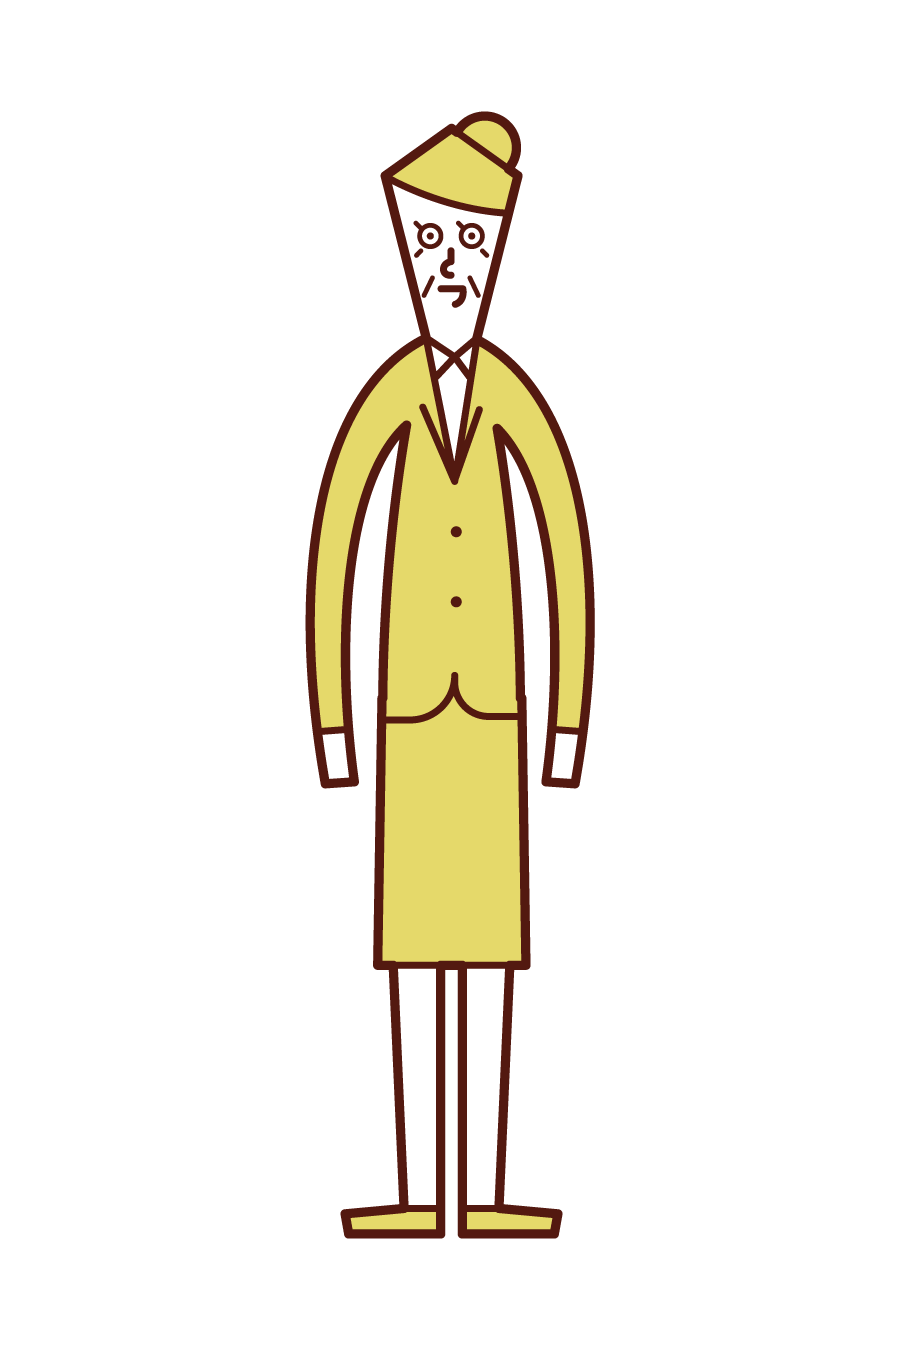 Illustration of grandmother in suit